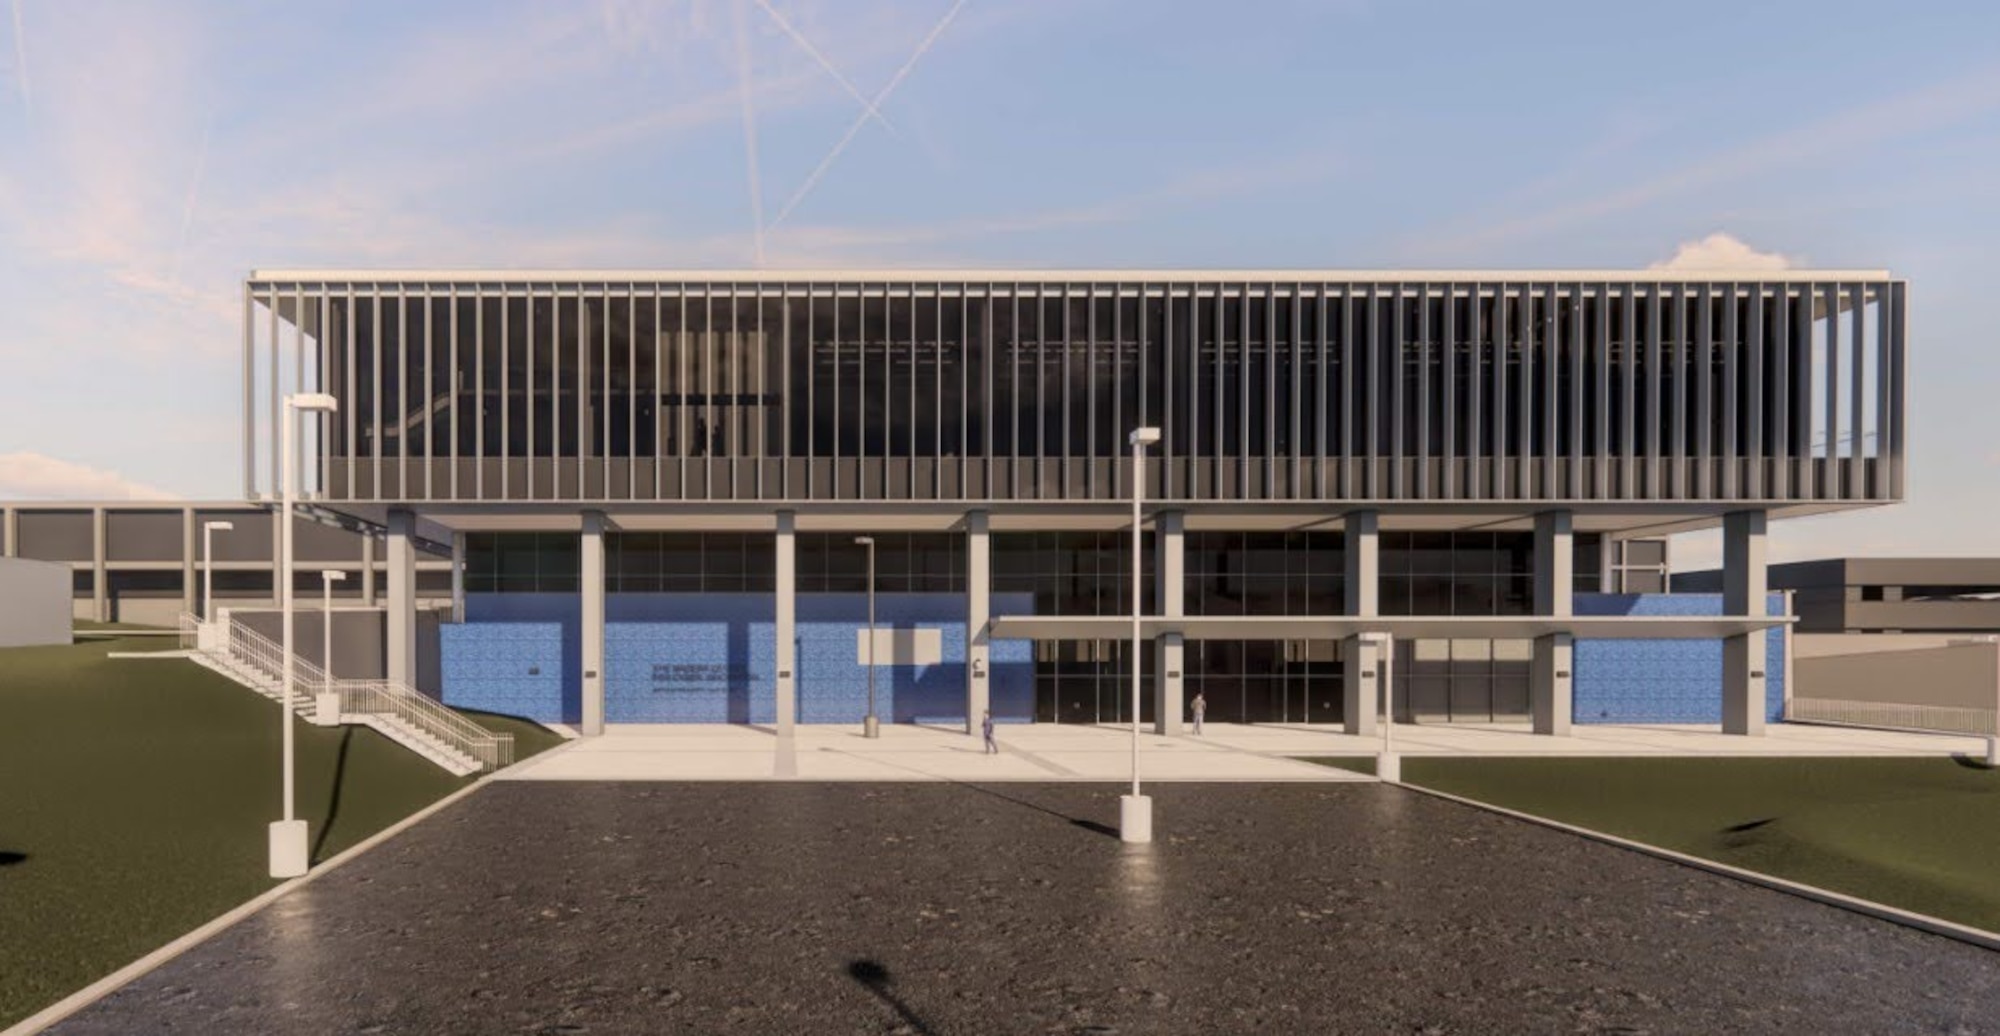 A graphic render of the Air Force Academy's Madera Cyber Innovation Center architecture.